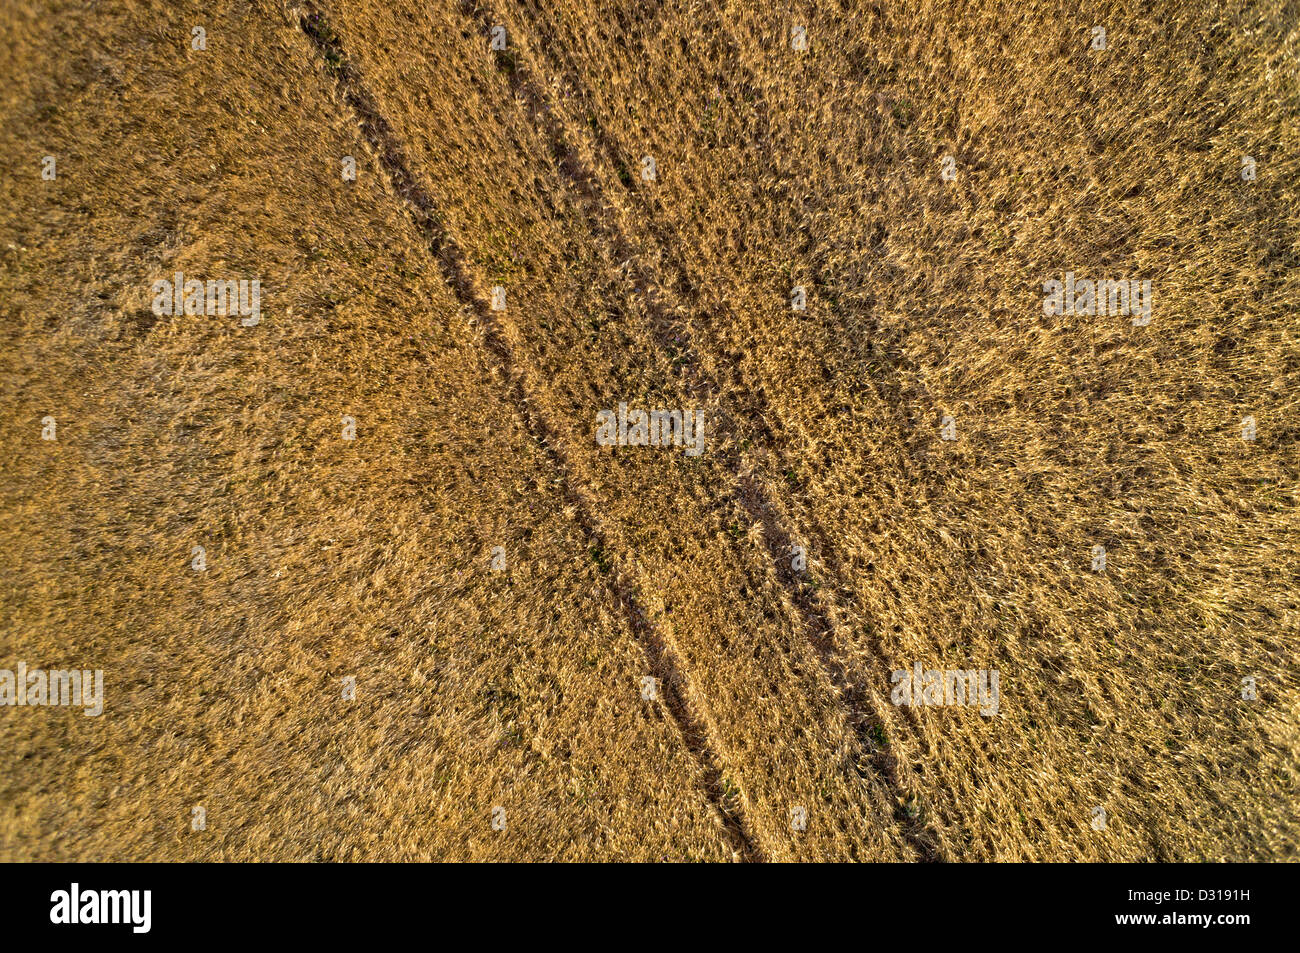 Wheat field in summer, aerial view Stock Photo